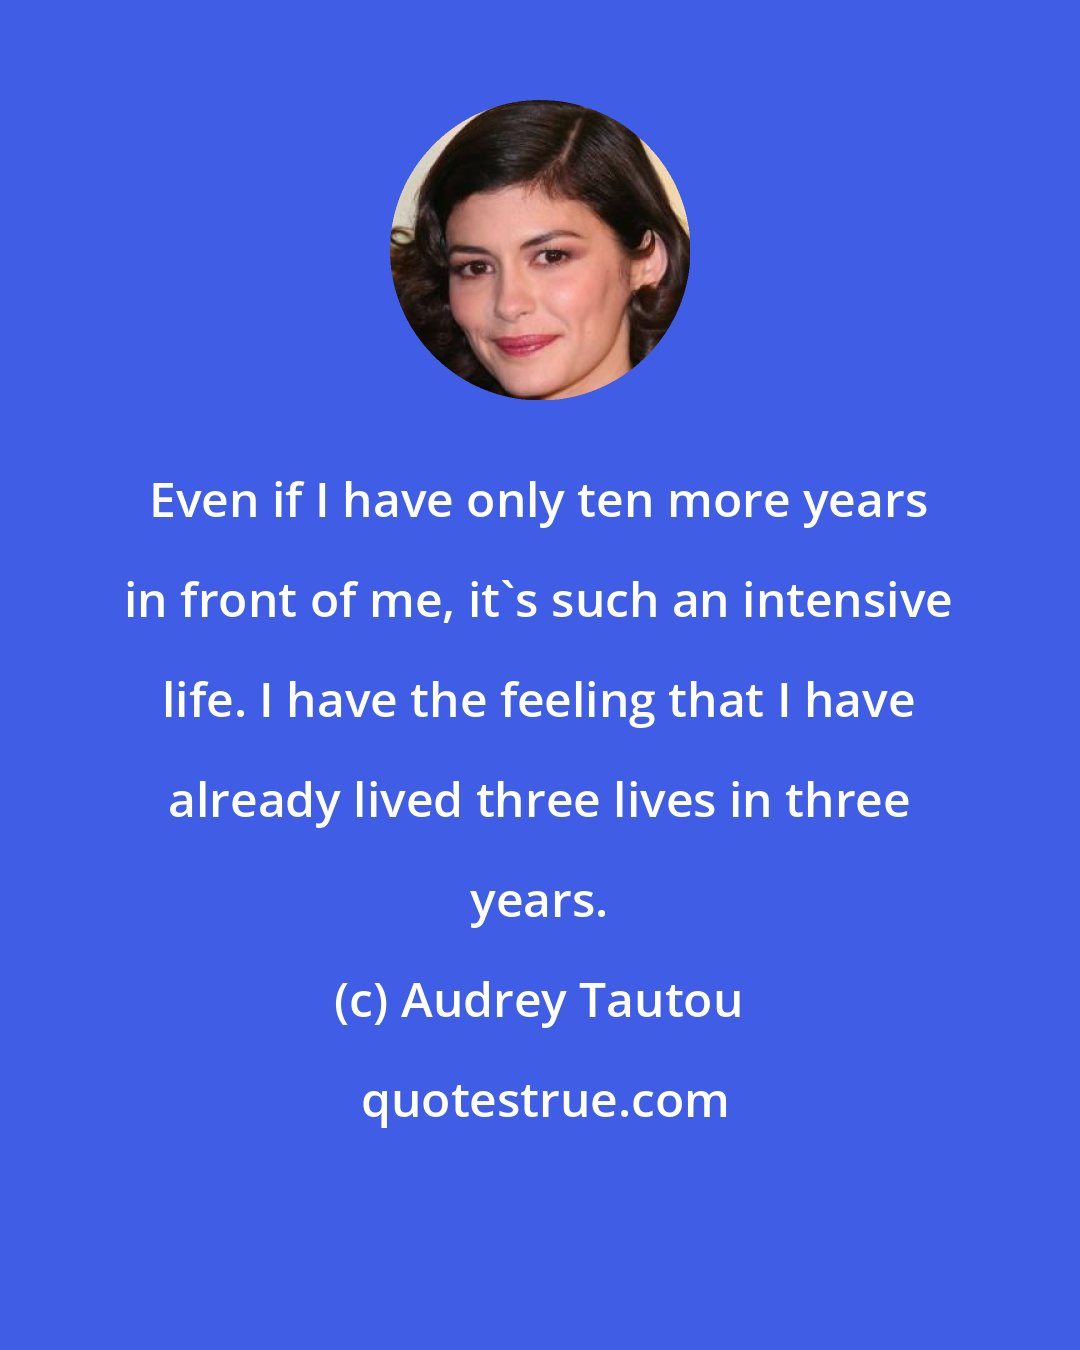 Audrey Tautou: Even if I have only ten more years in front of me, it's such an intensive life. I have the feeling that I have already lived three lives in three years.